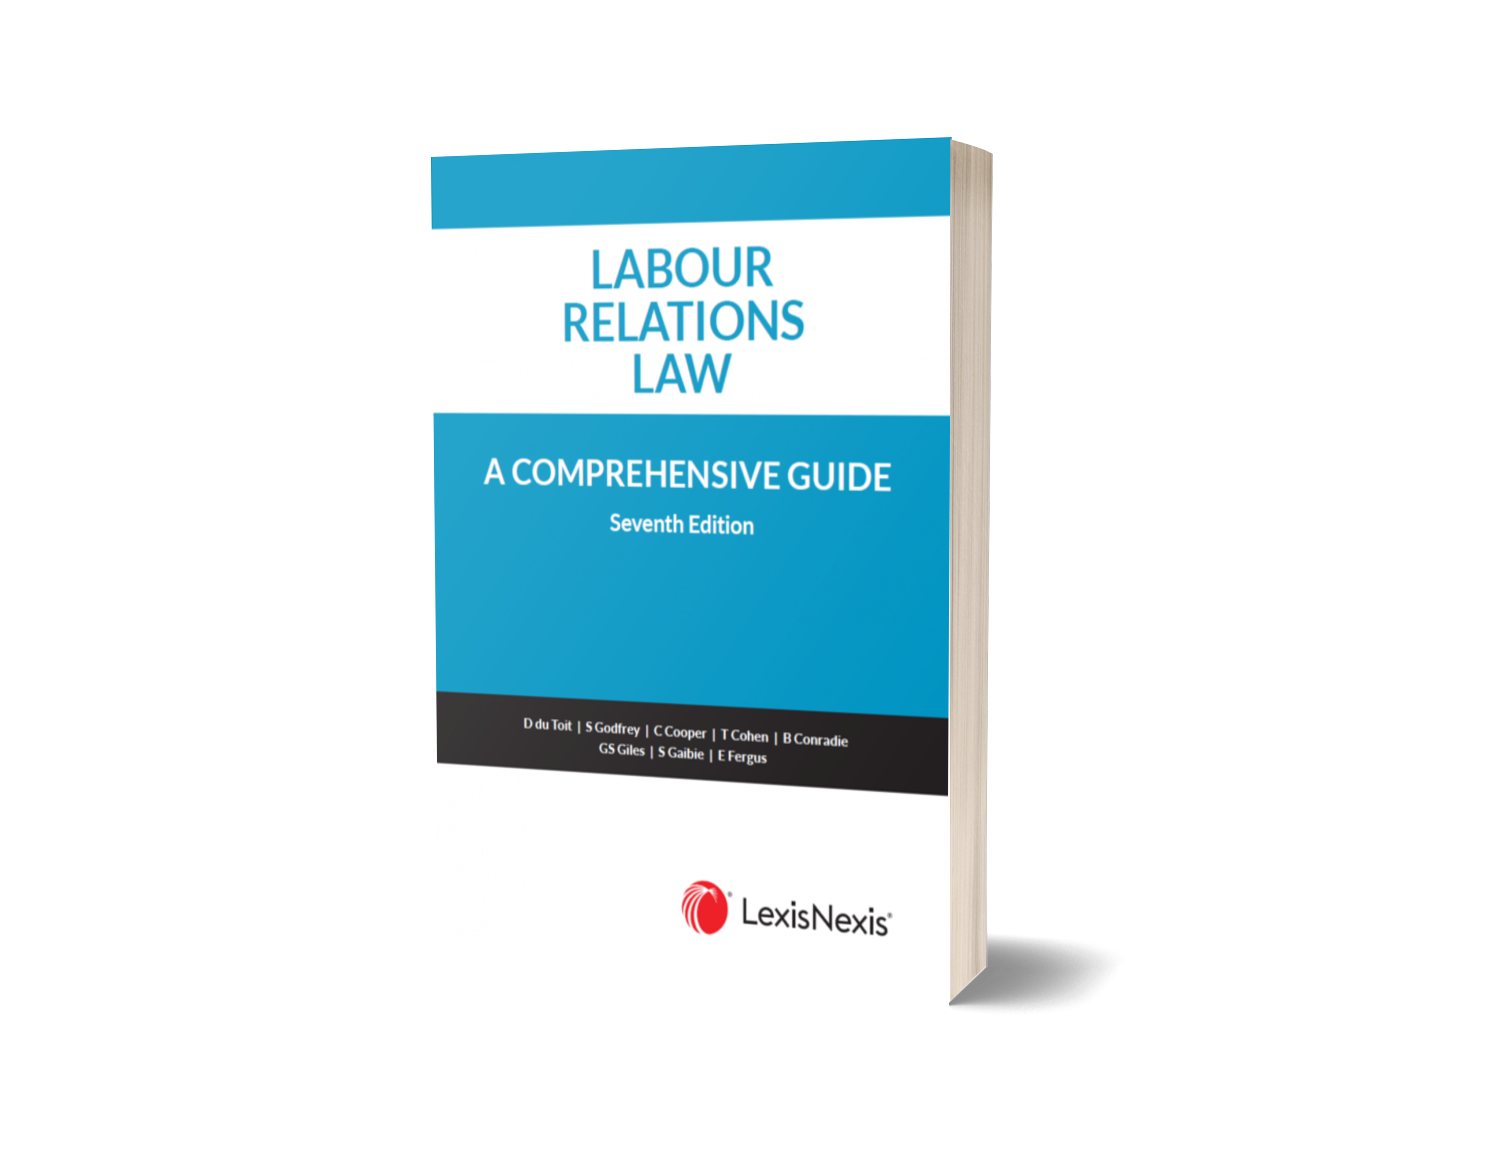 Du Toit, Darcy (ed.) Labour Relations Law: A Comprehensive Guide, 7th ed. (LexisNexis, 2023)